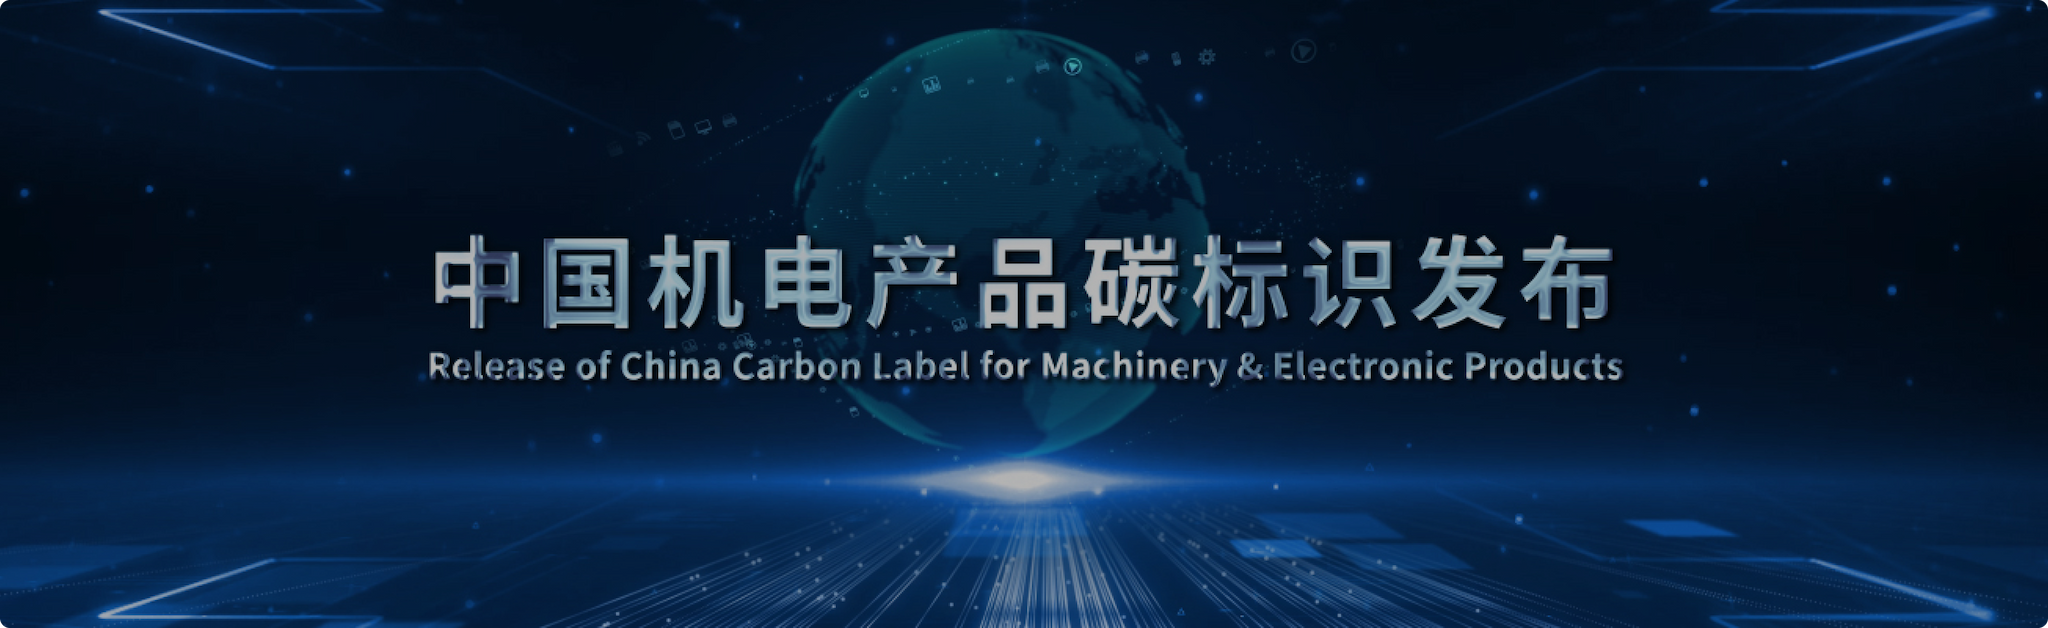 Video Cover image: Release of China Carbon Label for Machinery & Electronic Products